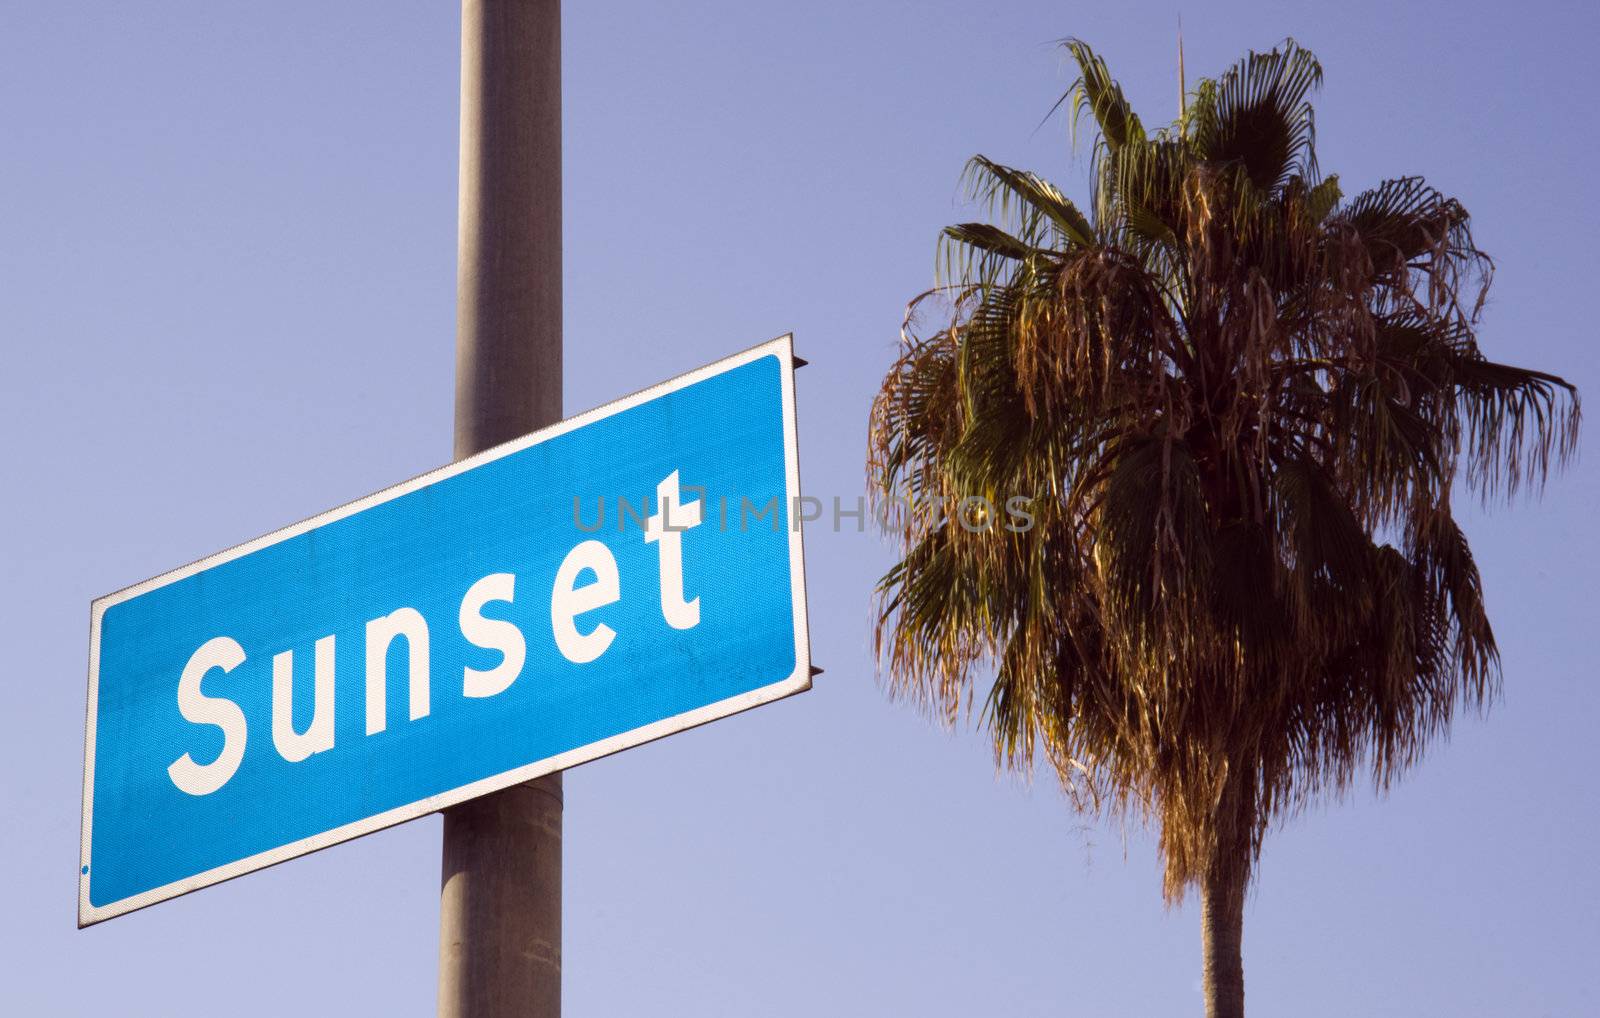 Sunset Boulevard by ChrisBoswell